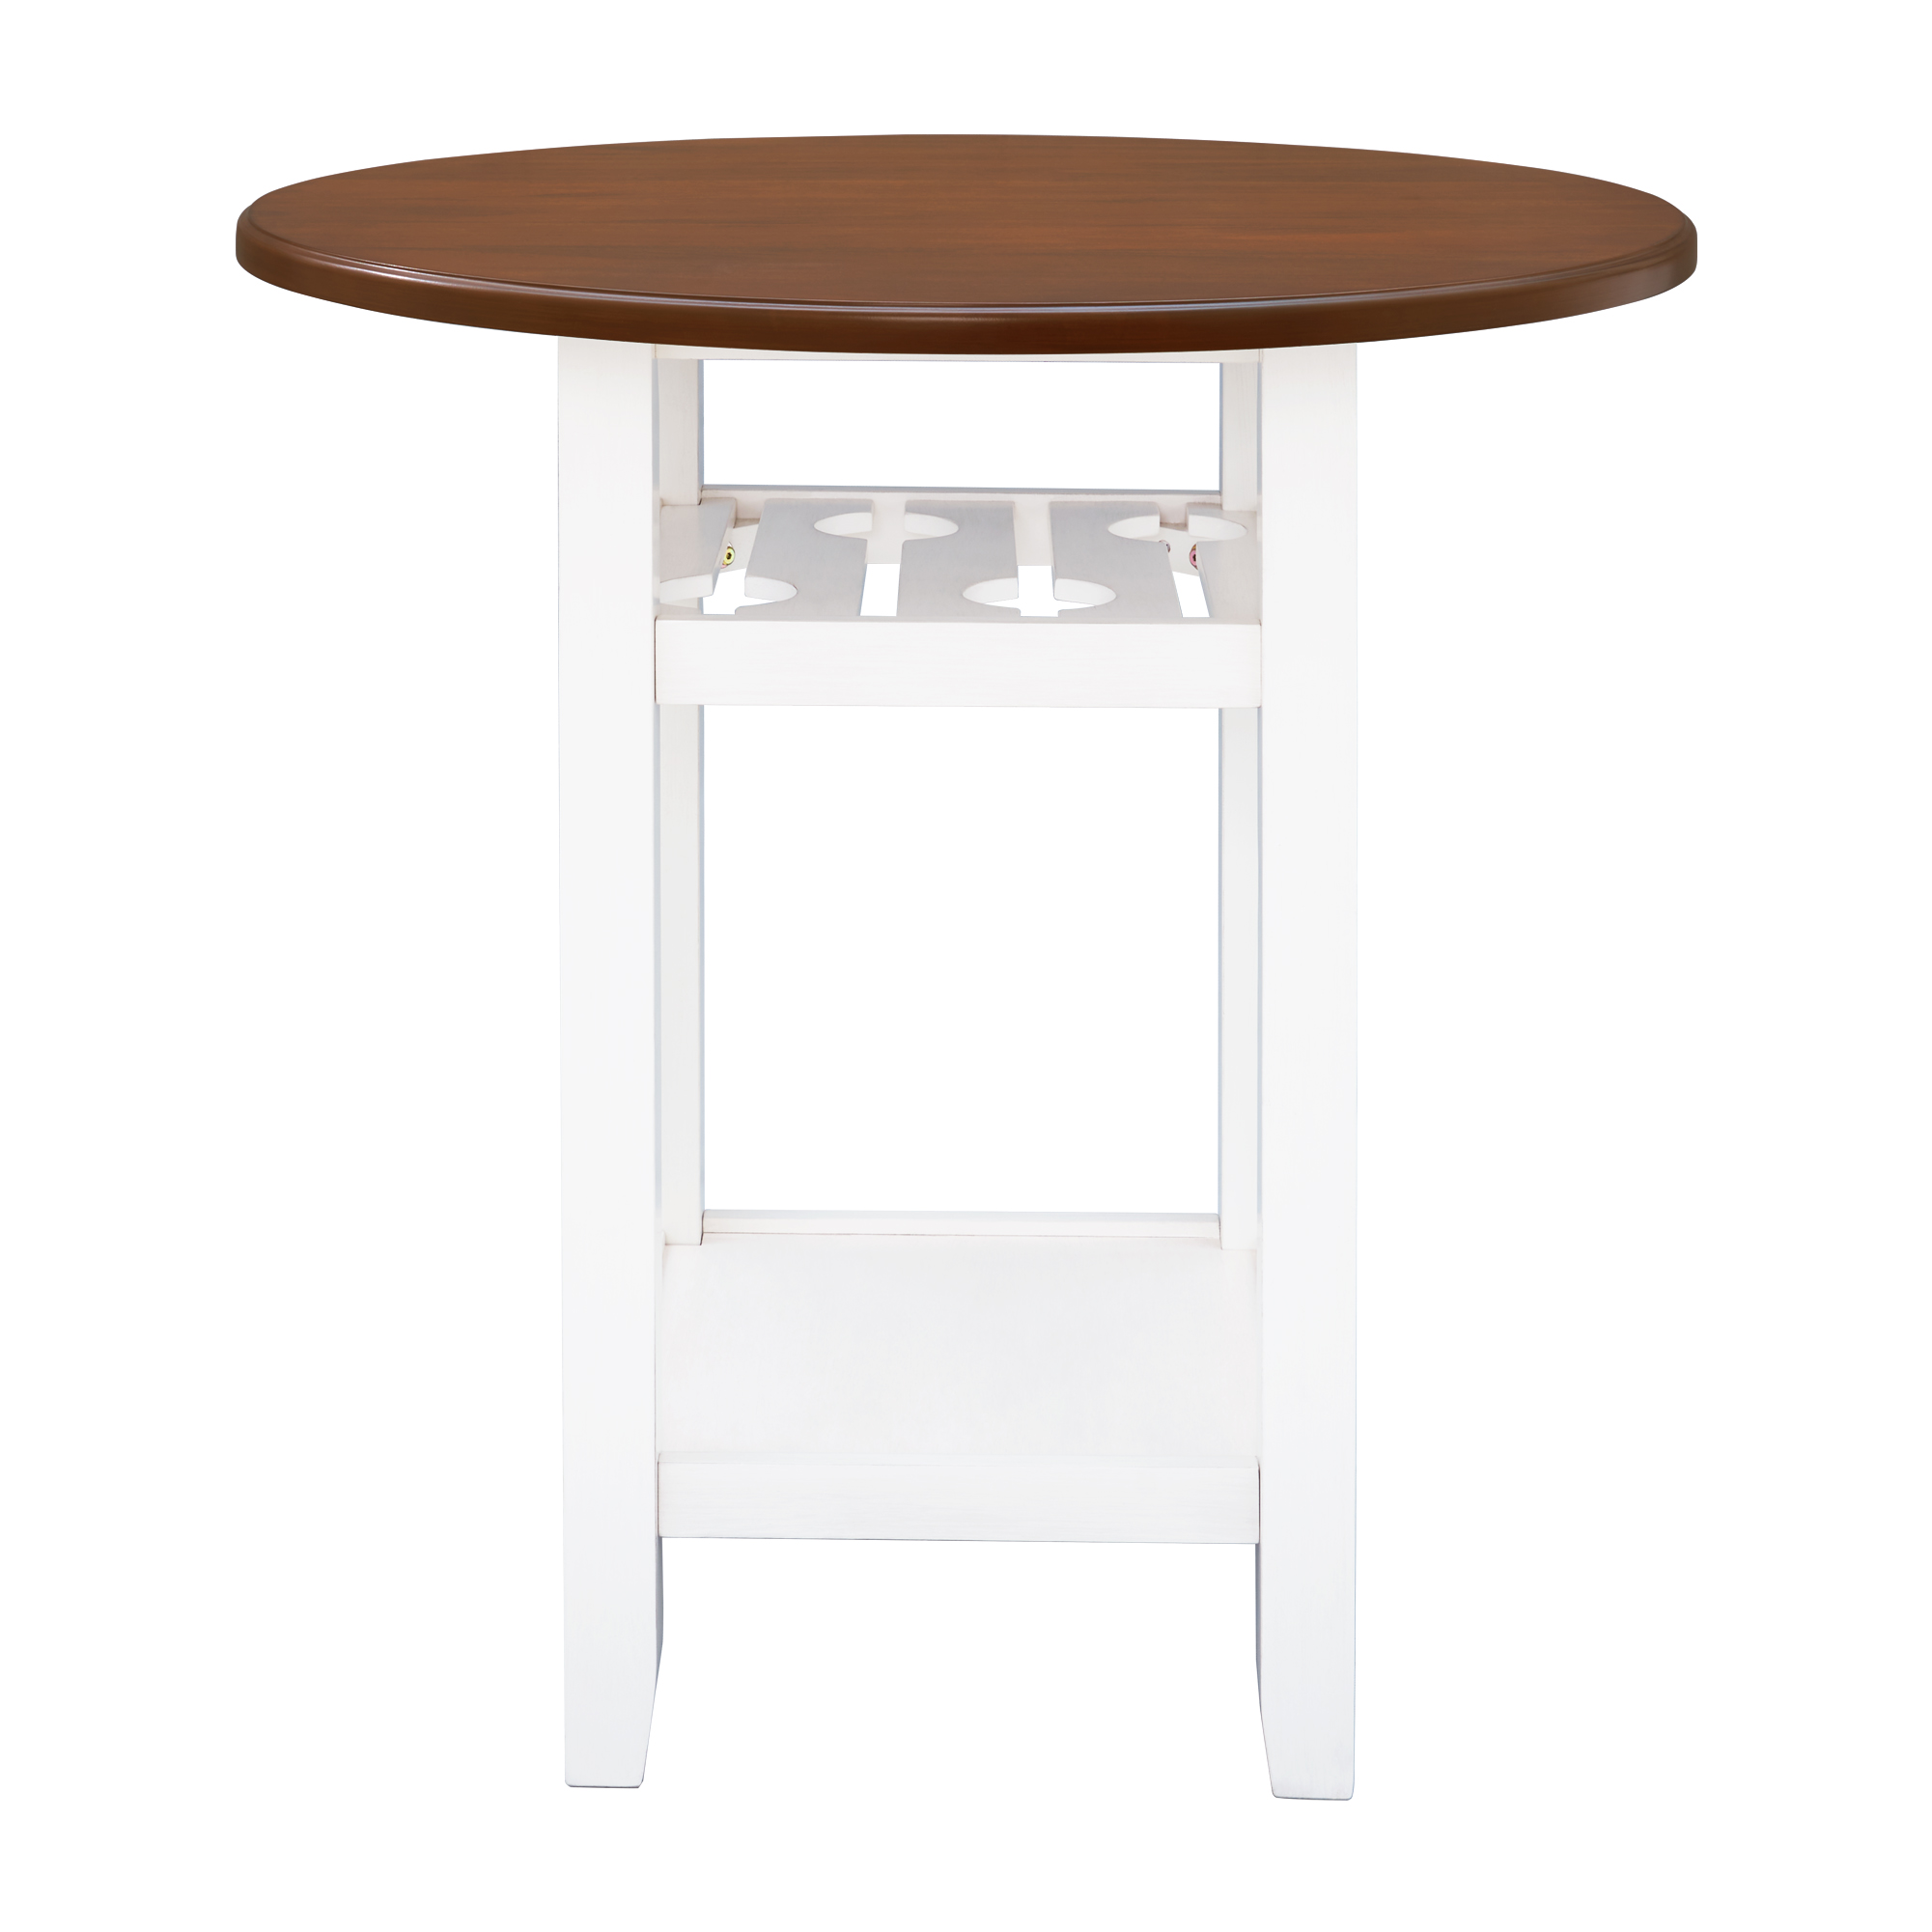 Farmhouse Round Counter Height Kitchen Dining Table with Storage Shelf and Glass Holder, Cherry+White-Boyel Living